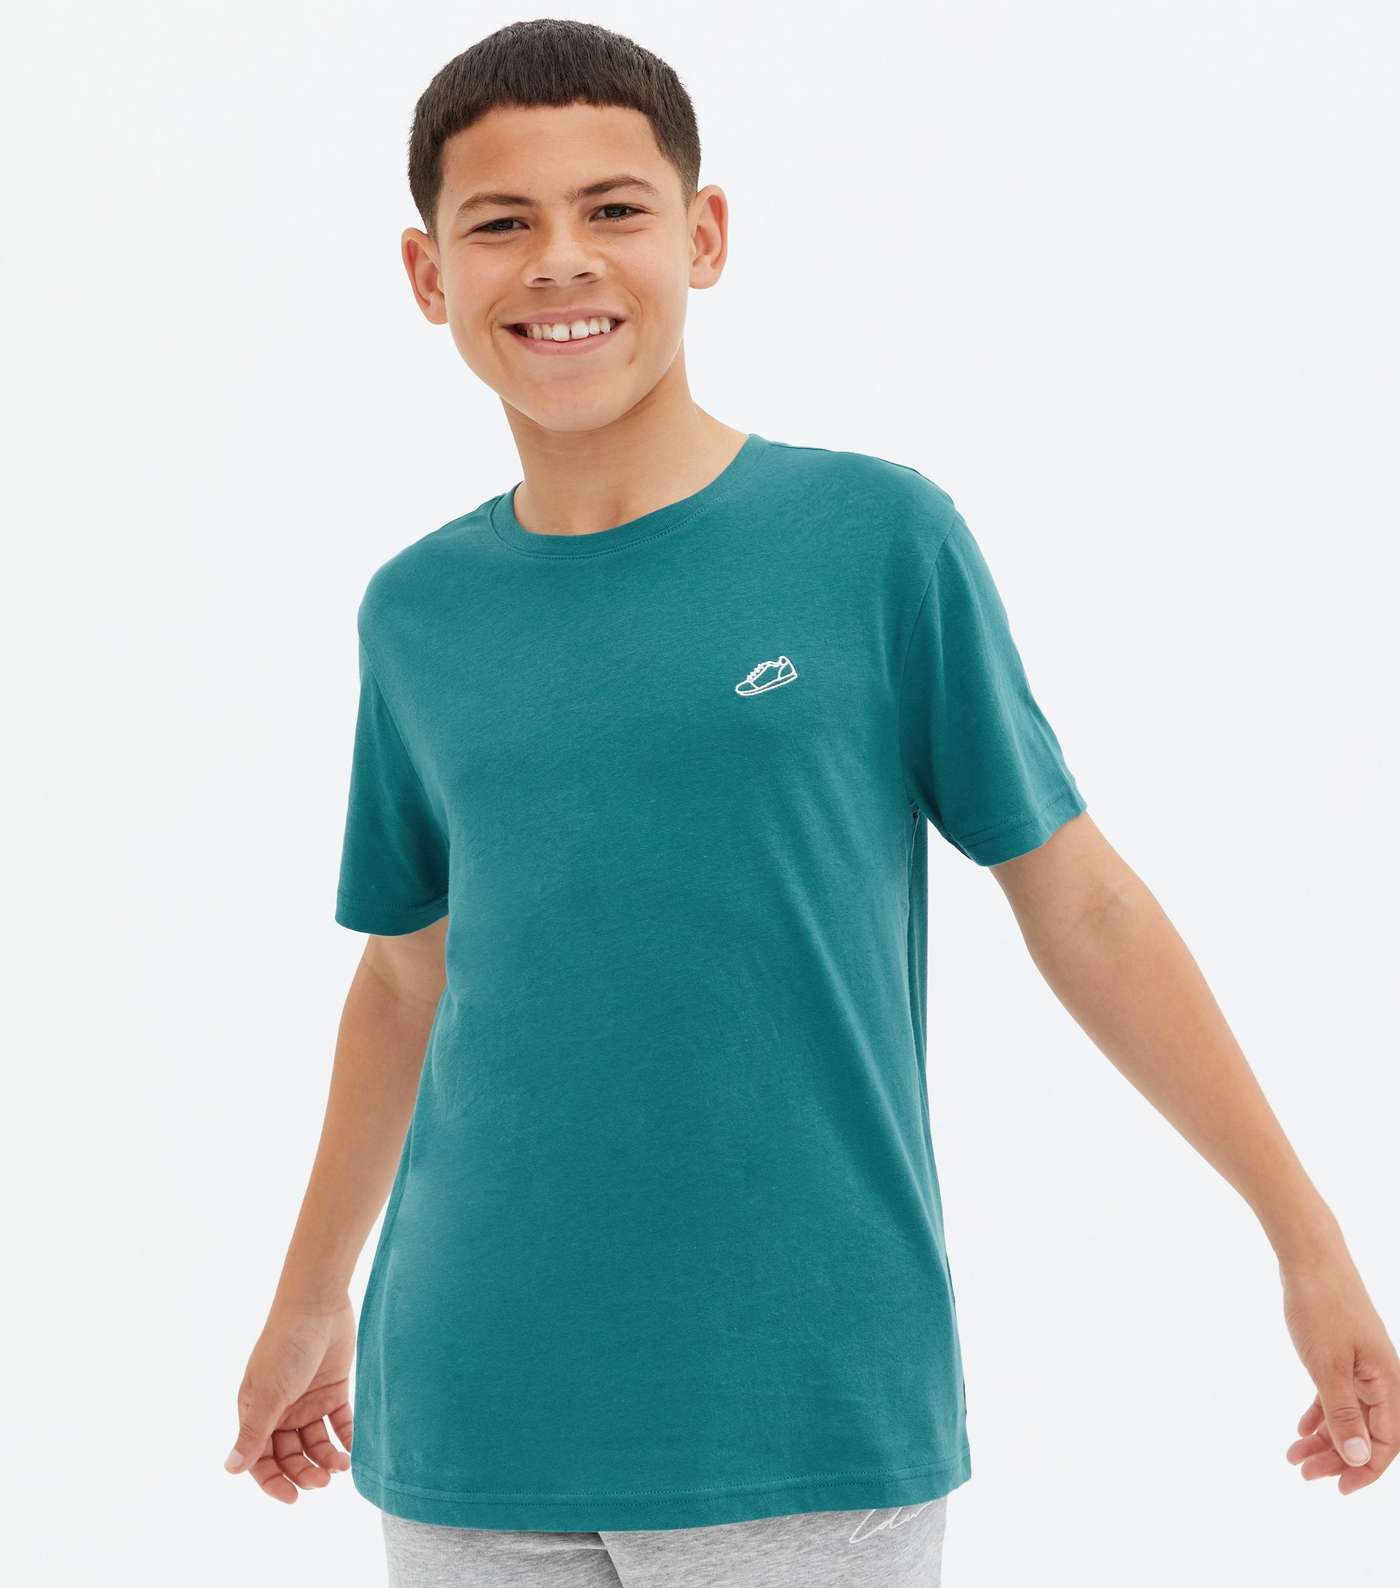 Boys 3 Pack Black Teal and White Mixed Embroidered T-Shirts Image 4